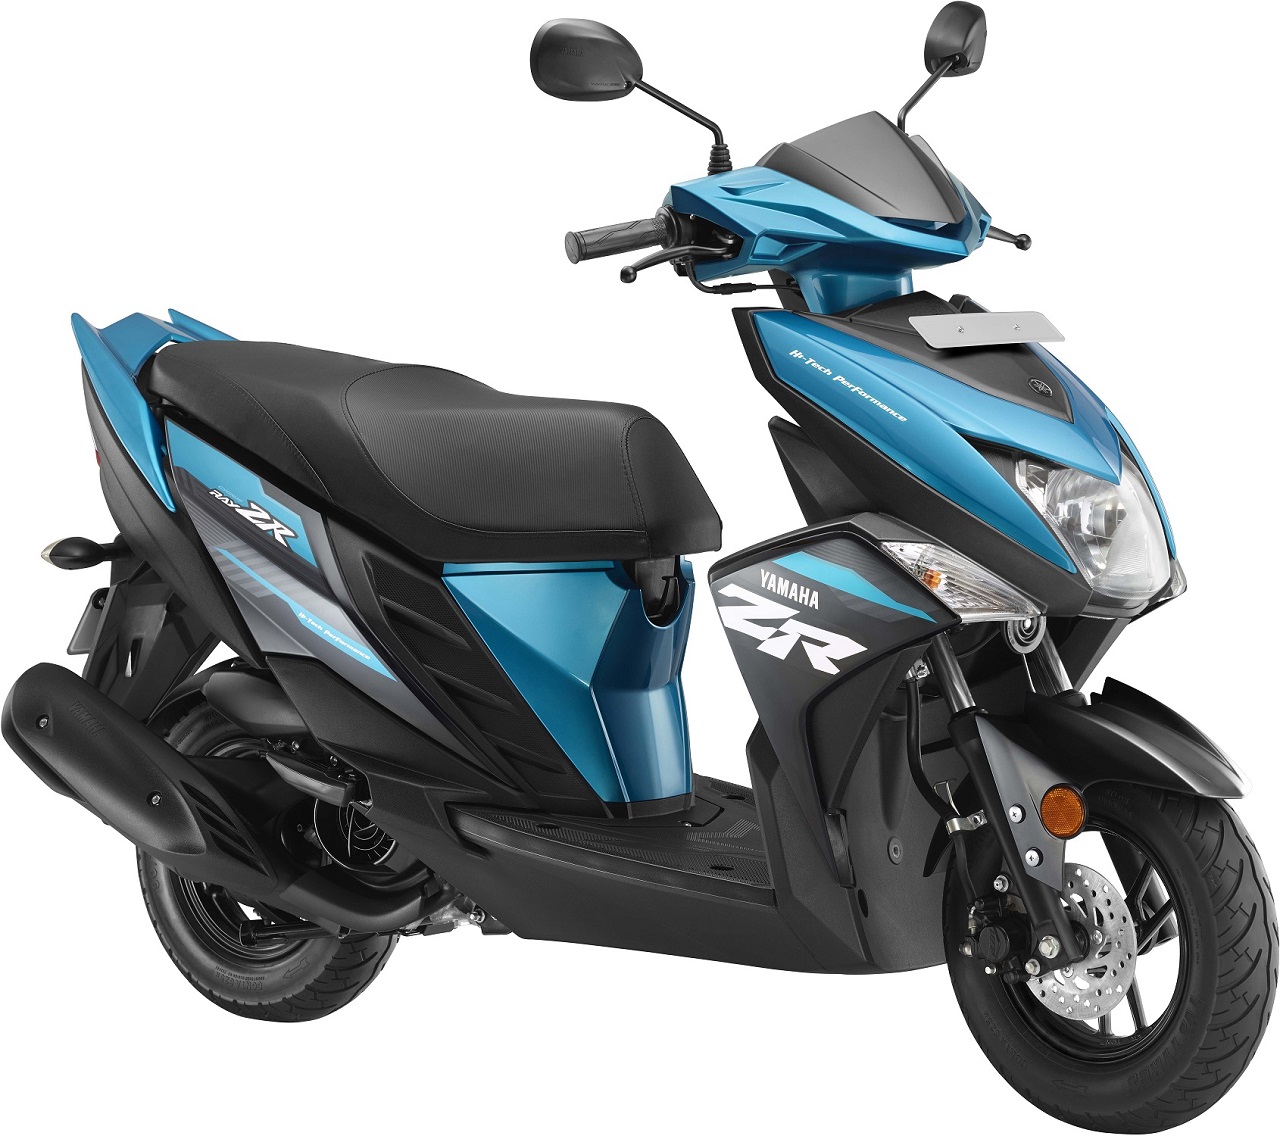 New Colours Of Yamaha Cygnus Ray Zr Launched In India